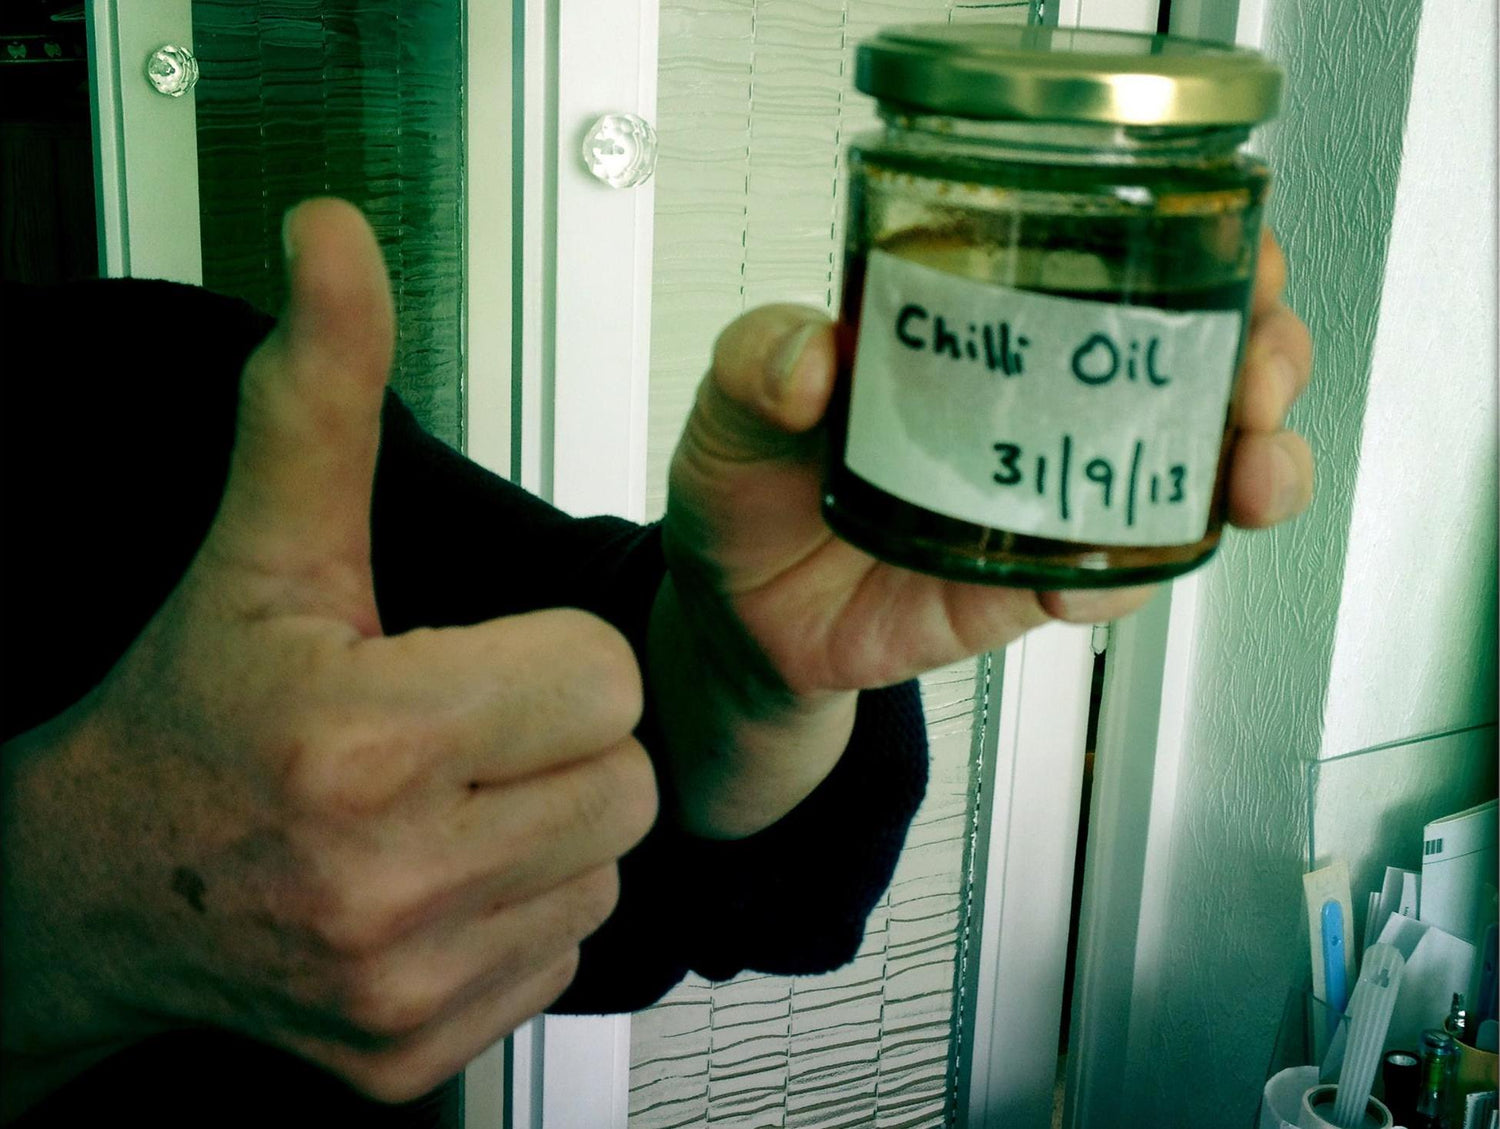 holding chilli oil jar from 2013 with filter